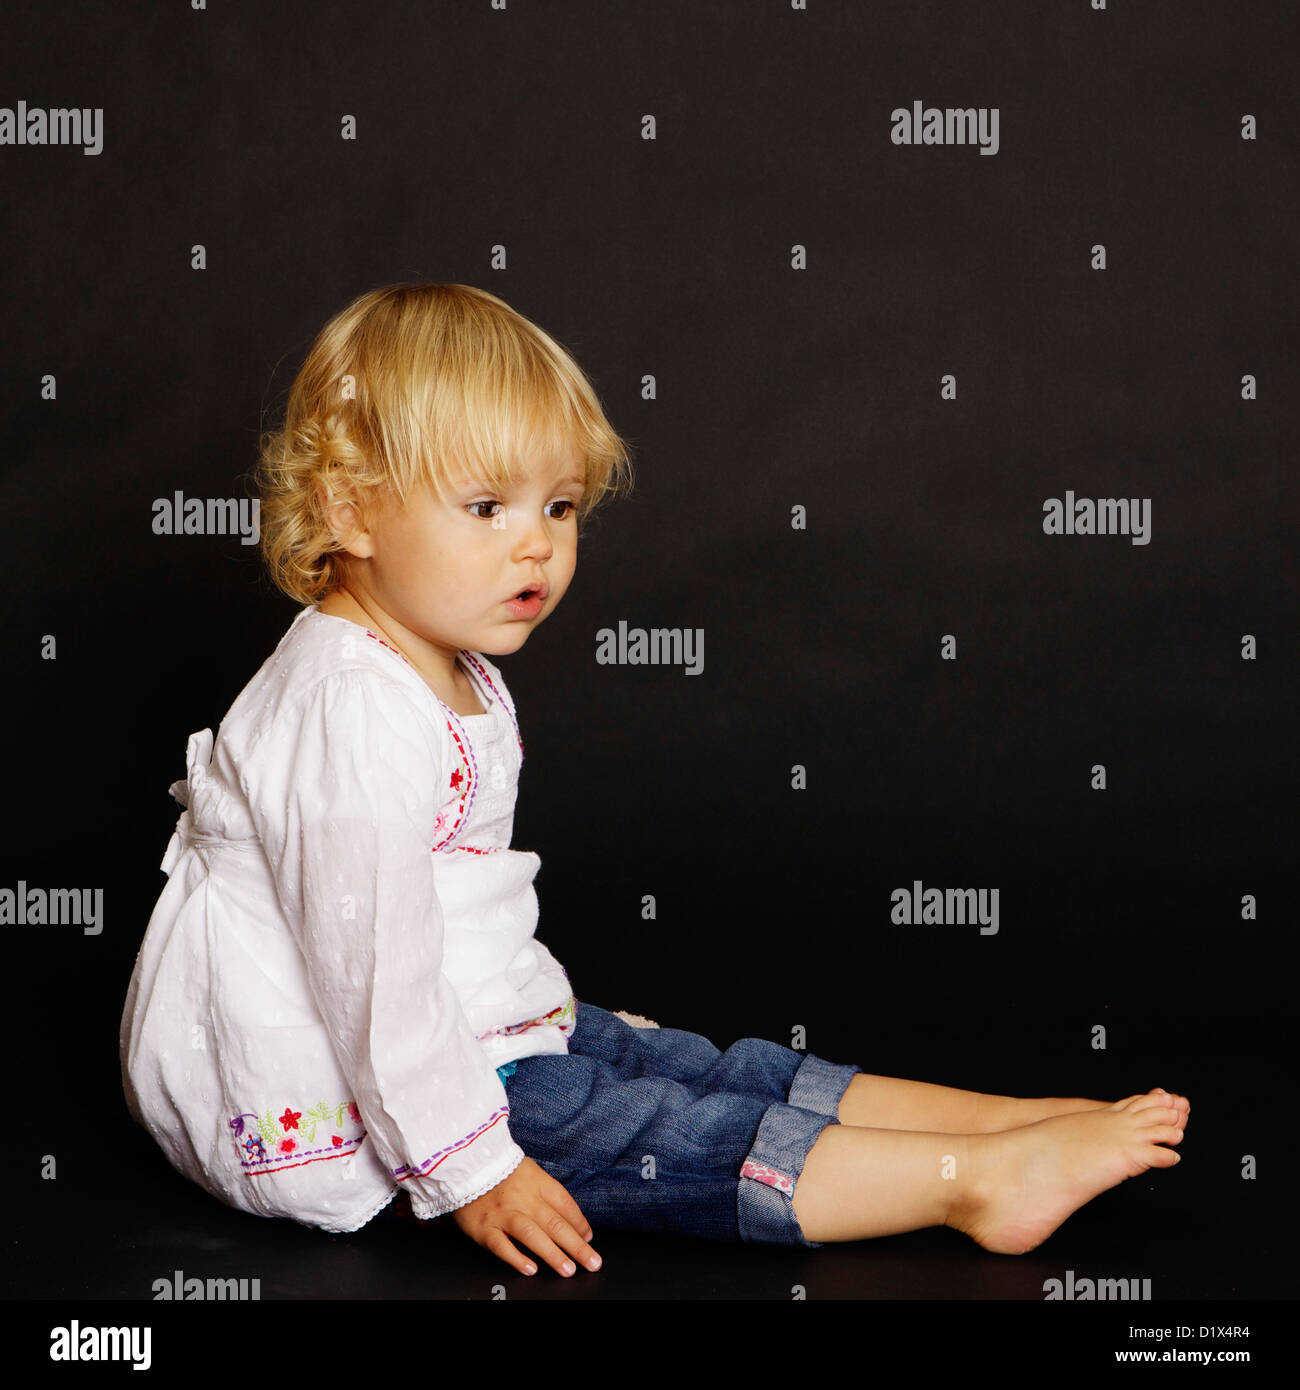 Two year old blonde infant girl in white shirt and denim on black background Stock Photo